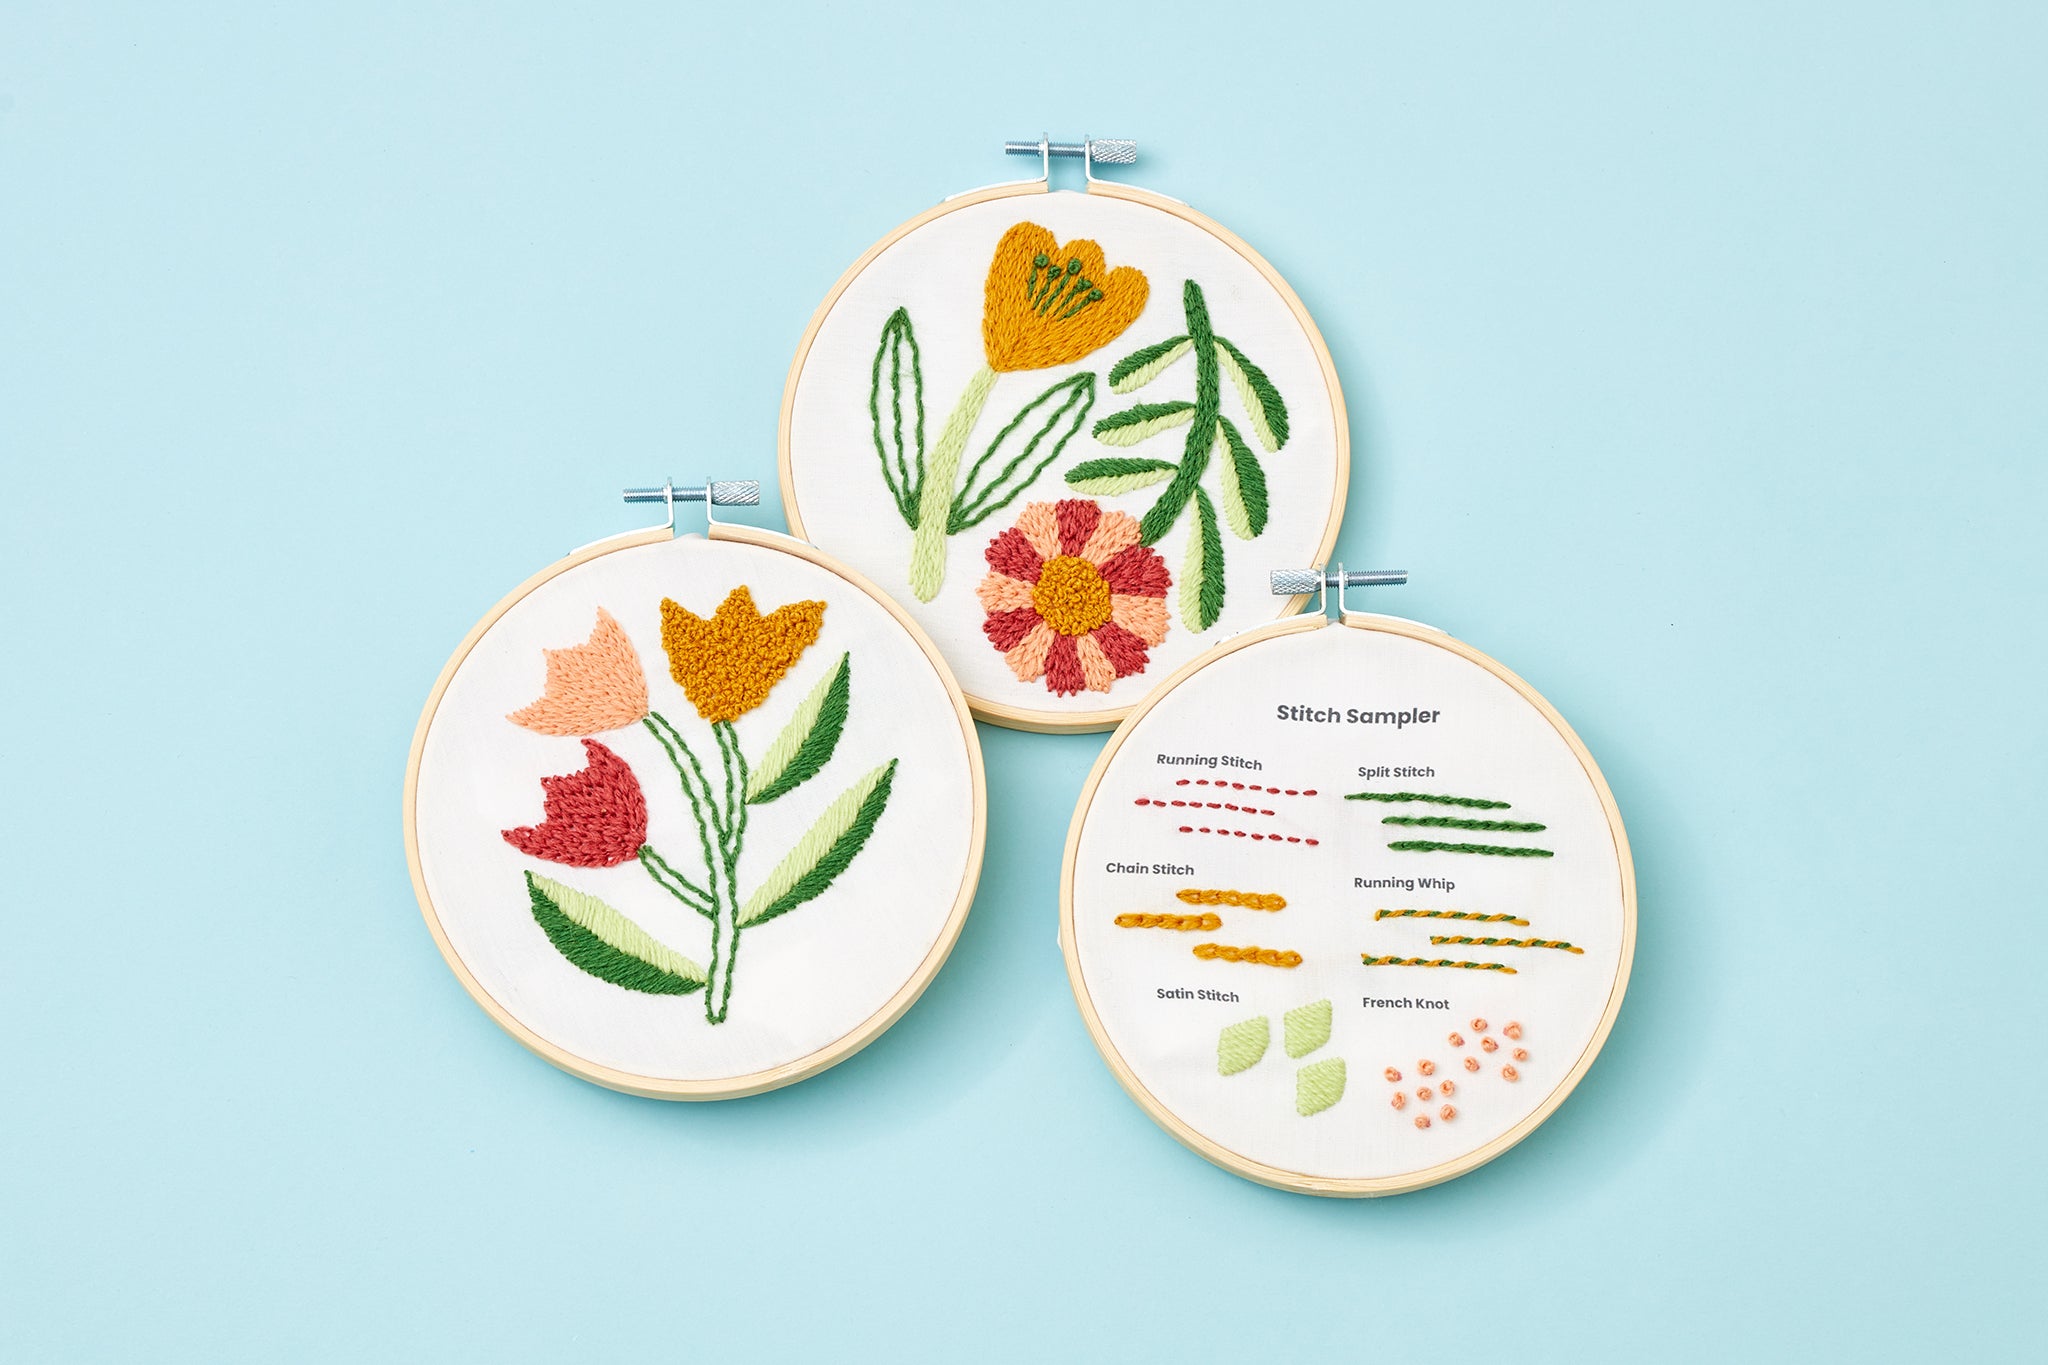 Embroidery Kit with Projects by Arounna Khounnoraj